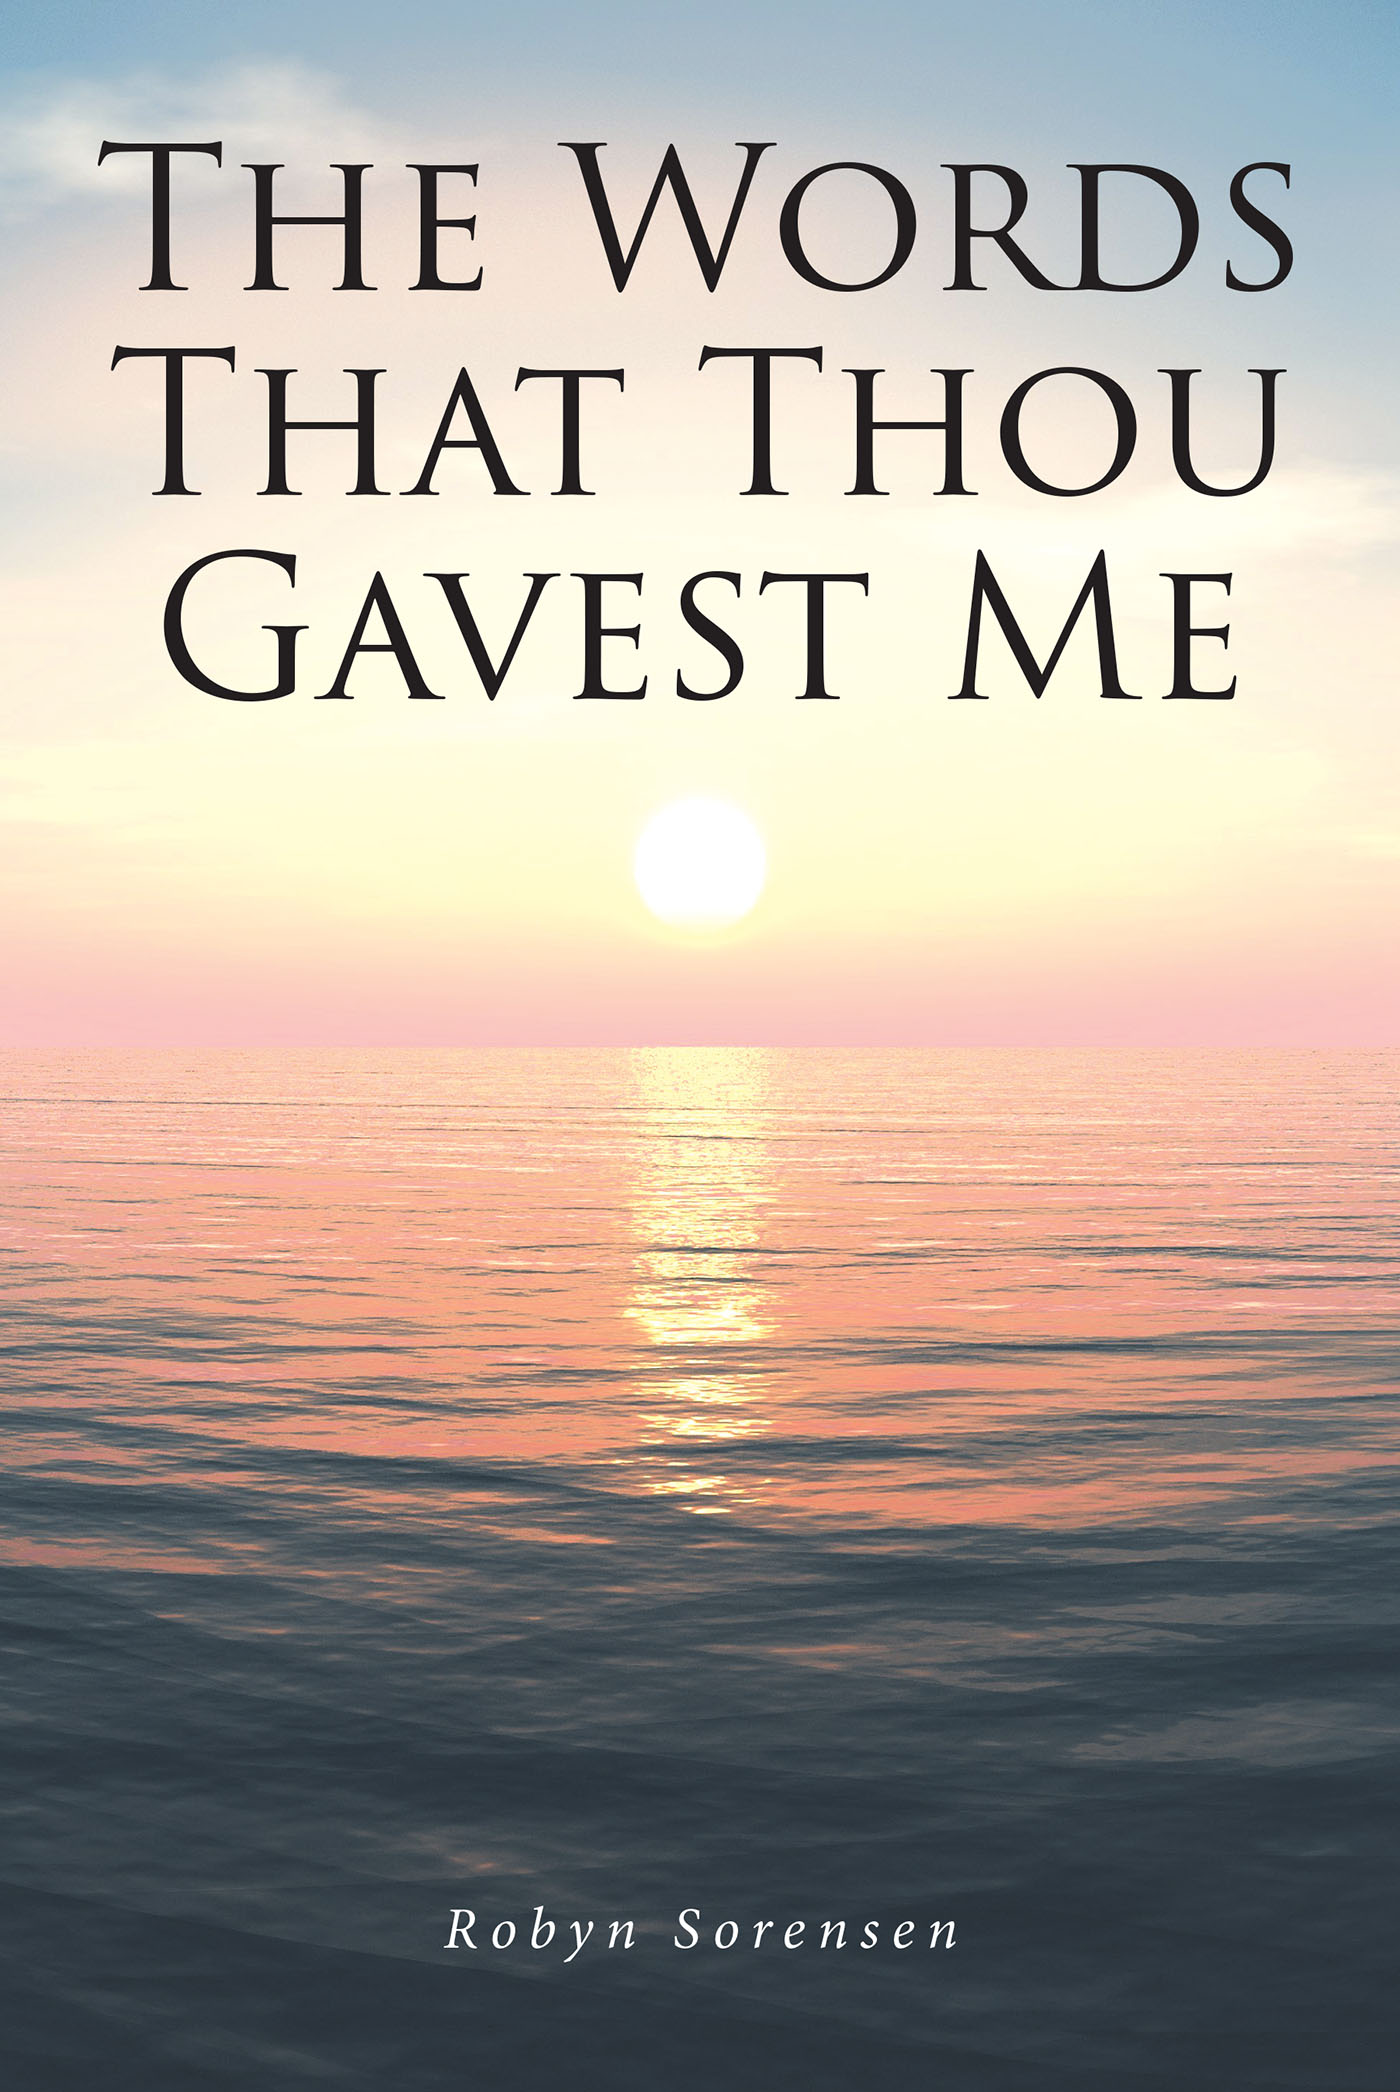 Author Robyn Sorensen’s New Book, “The Words That Thou Gavest Me,” is a Series of Poems Inspired by the Author's Faith to Honor Christ for All of Life's Blessings